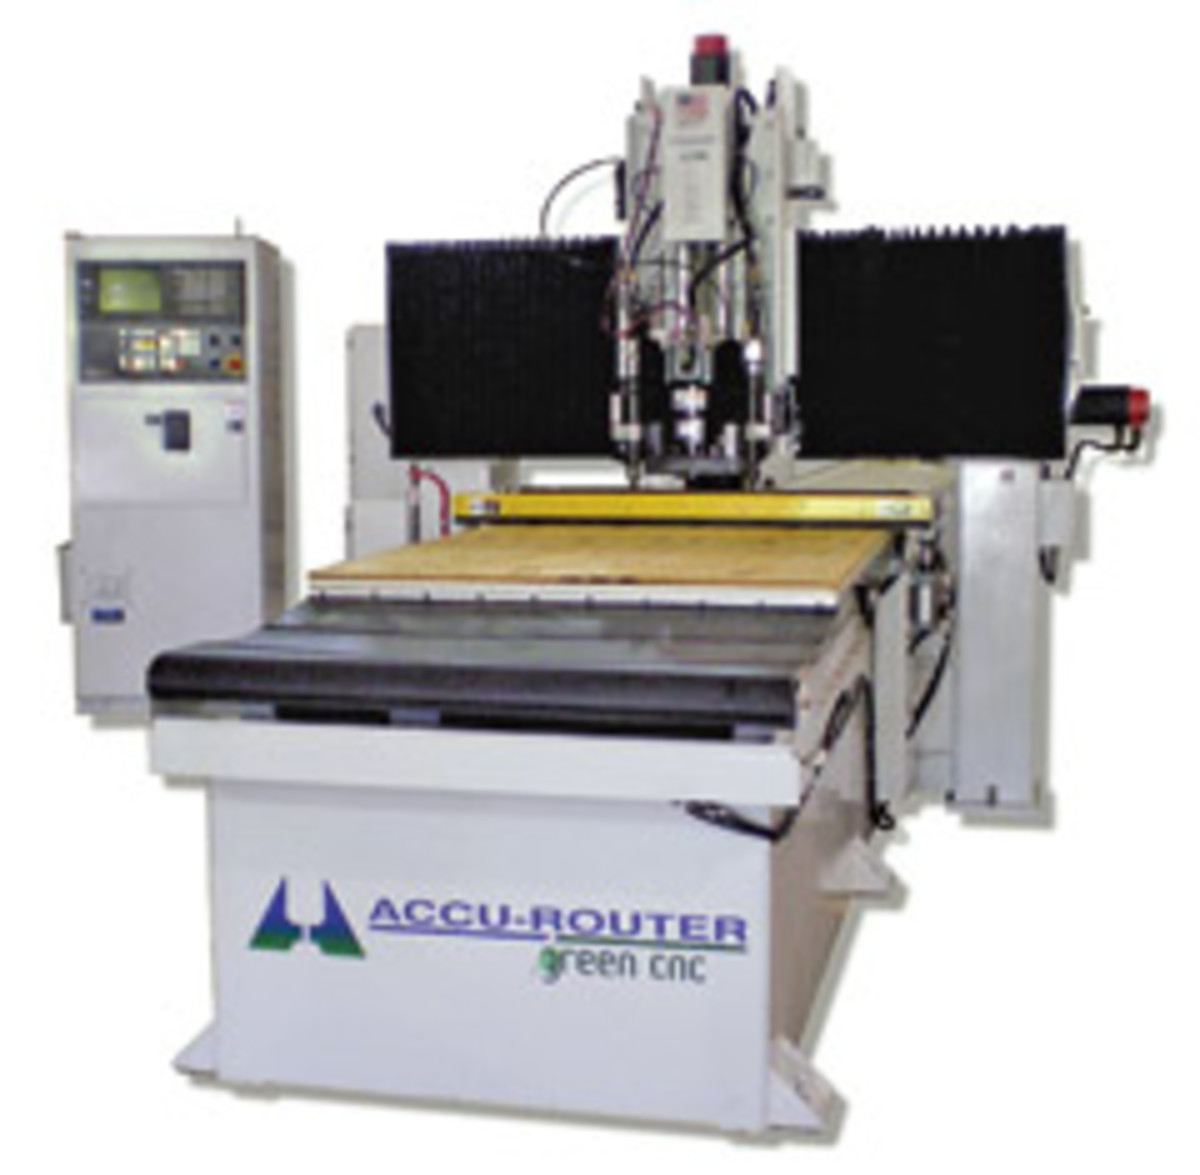 The Series II CNC router from Accu-Router.